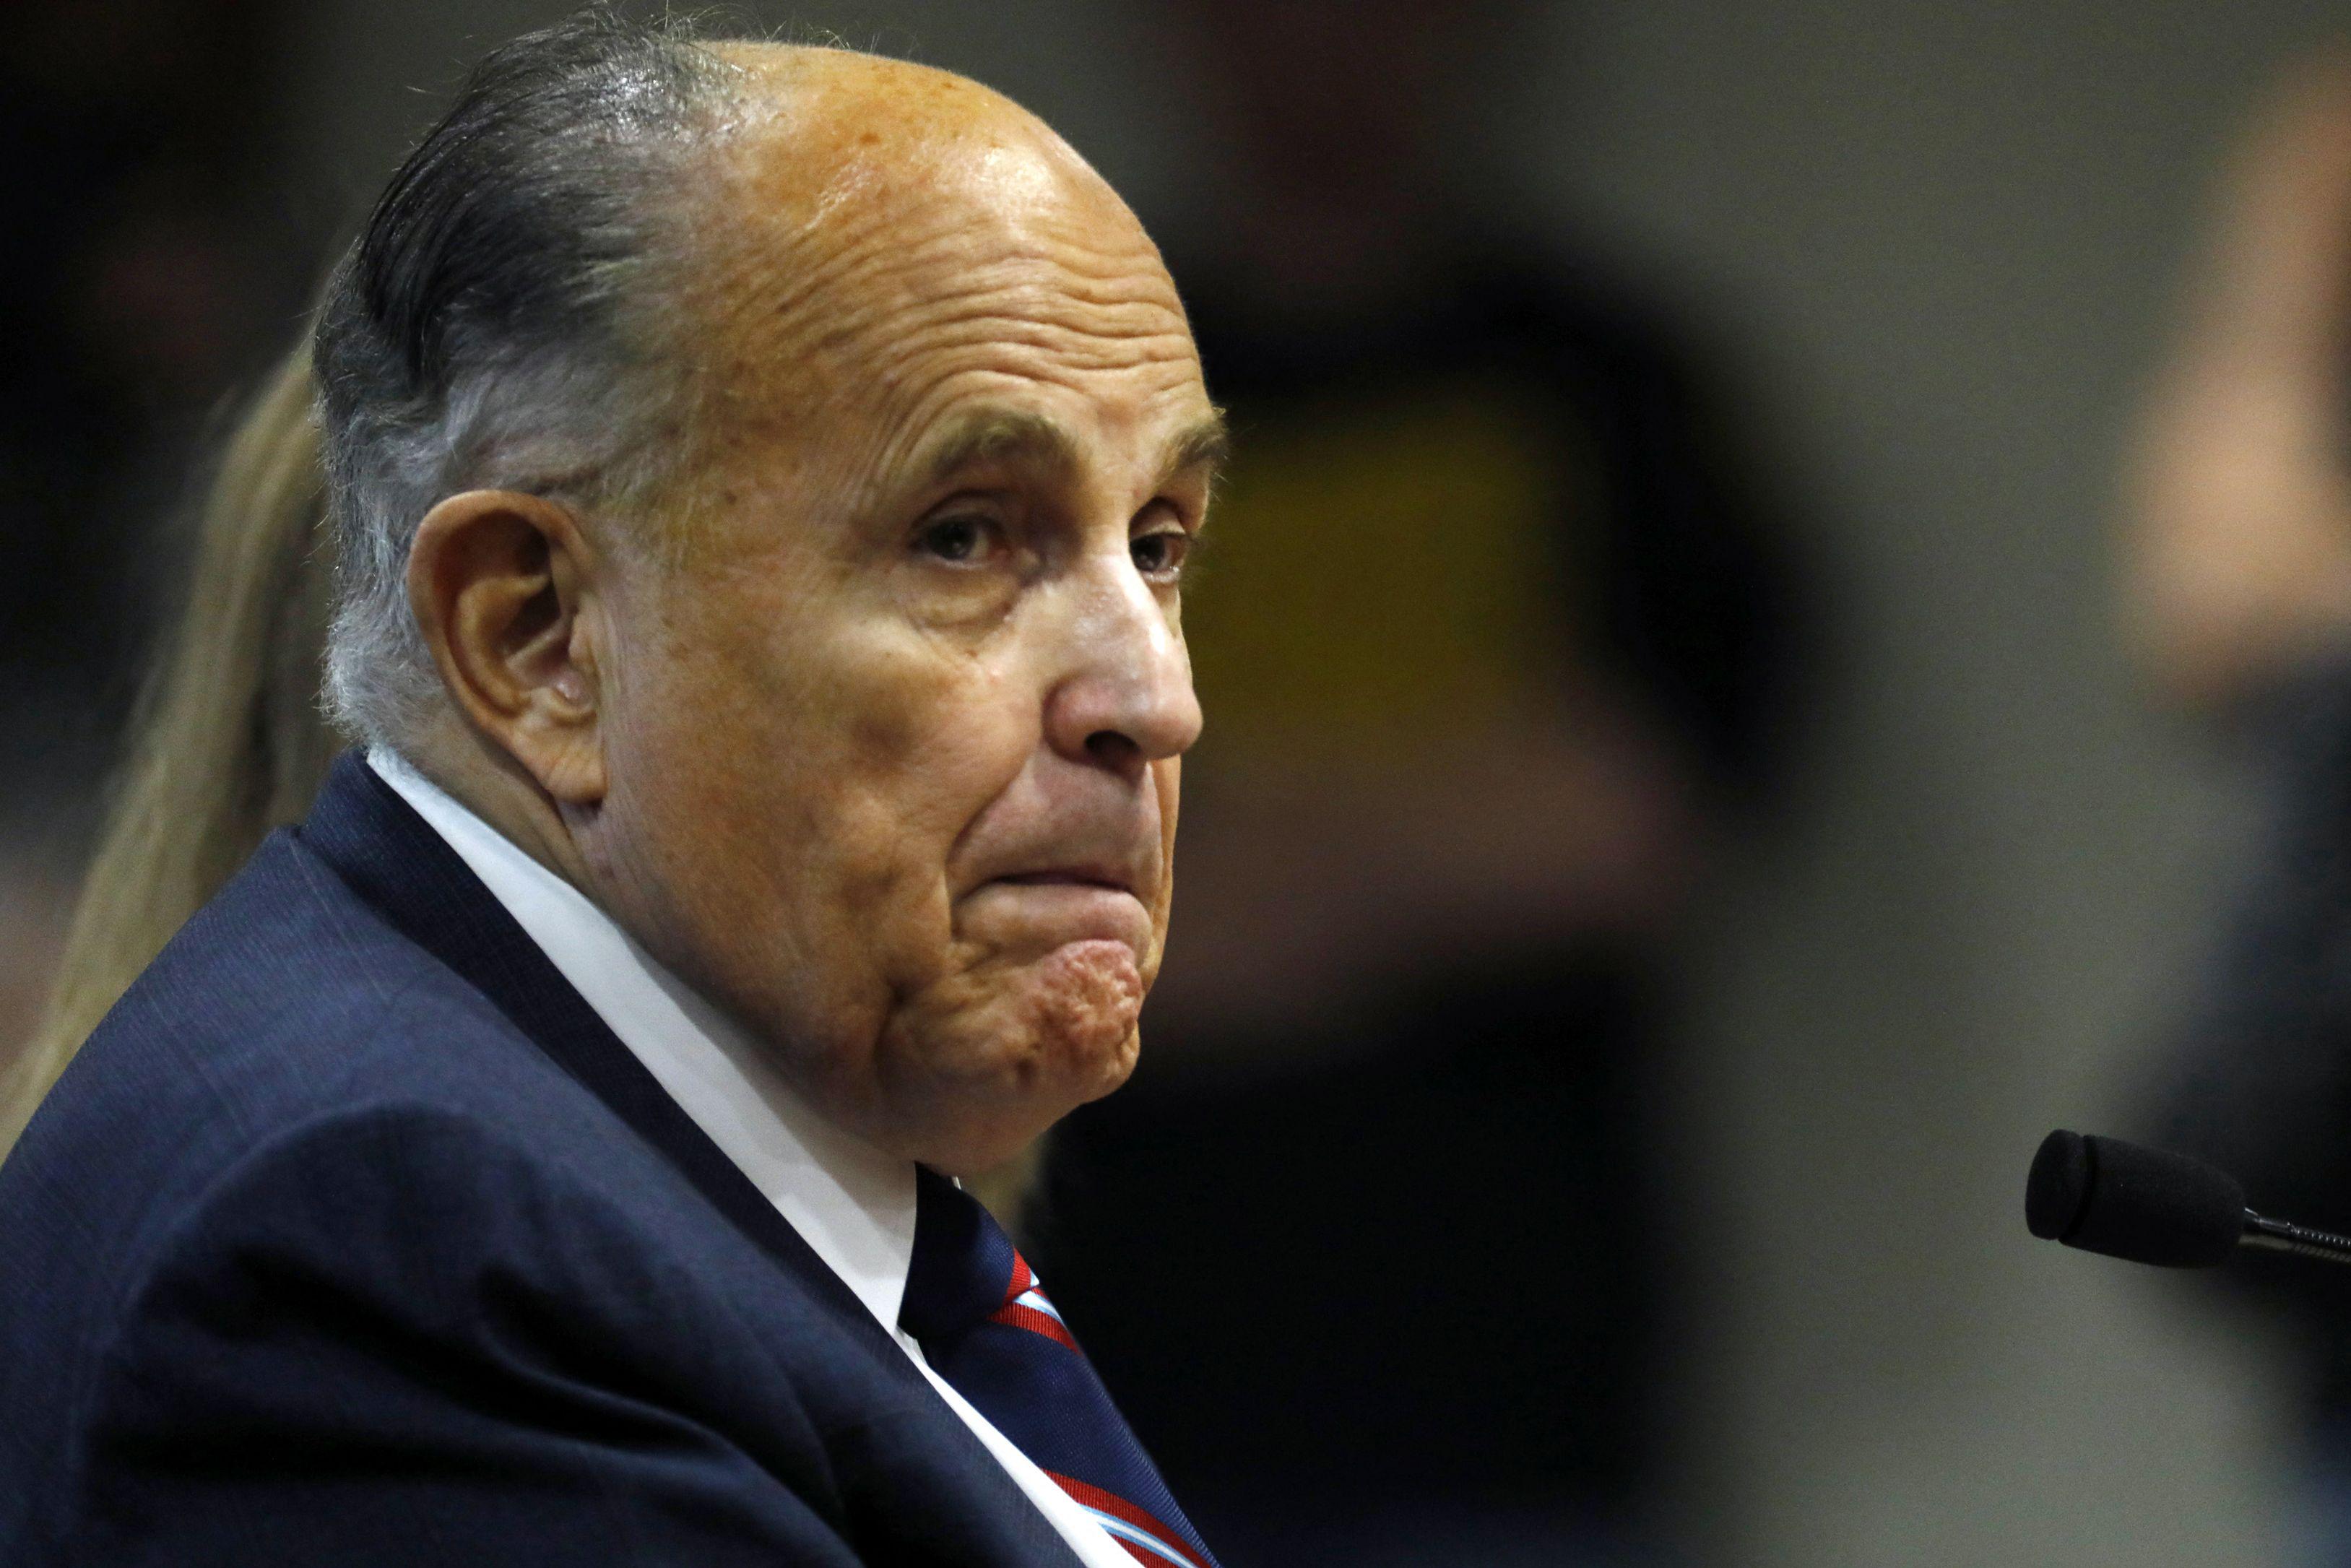 Rudolph Giuliani is in bankruptcy after being awarded $148 million in damages